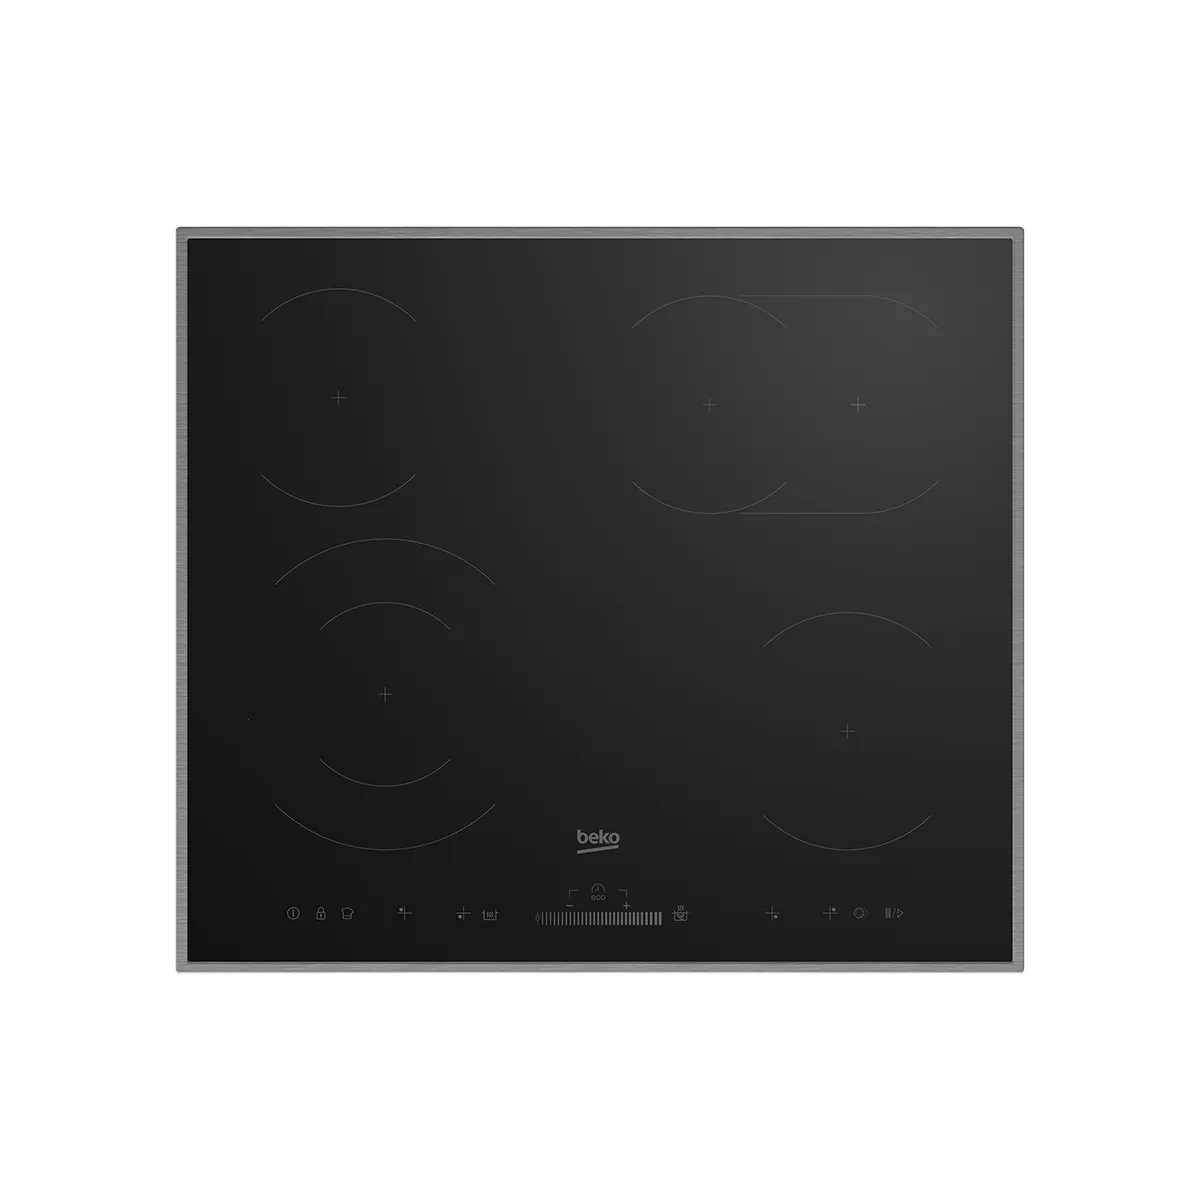 Beko Electric Hob 60 cm - Digital Touch Control- Black Tempered Glass Surfac - Memory Function